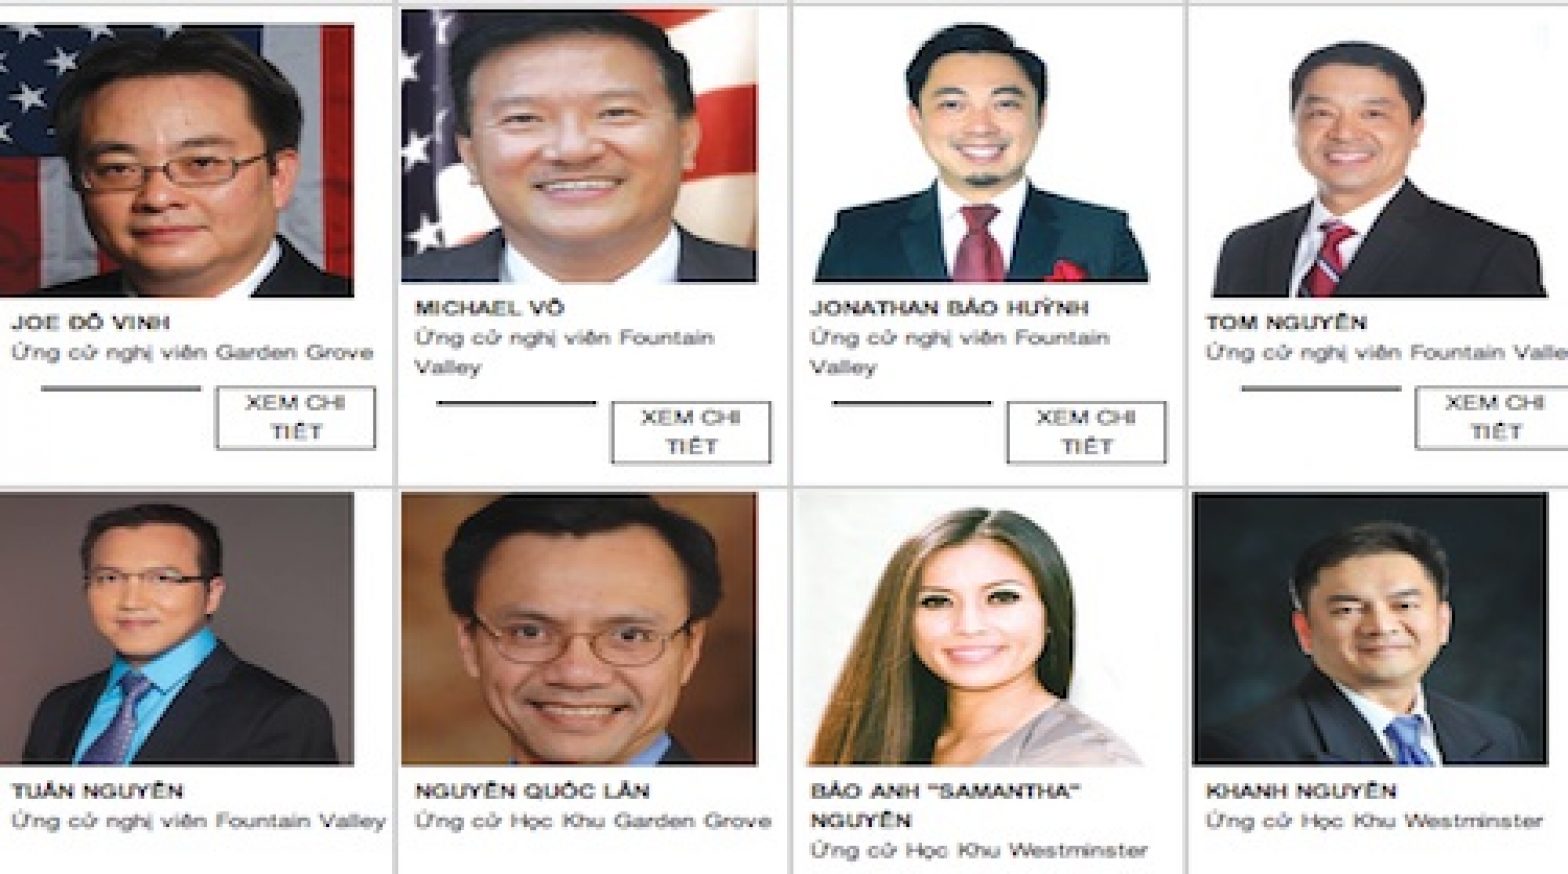 a_lam_asian_voters_500x279.jpg